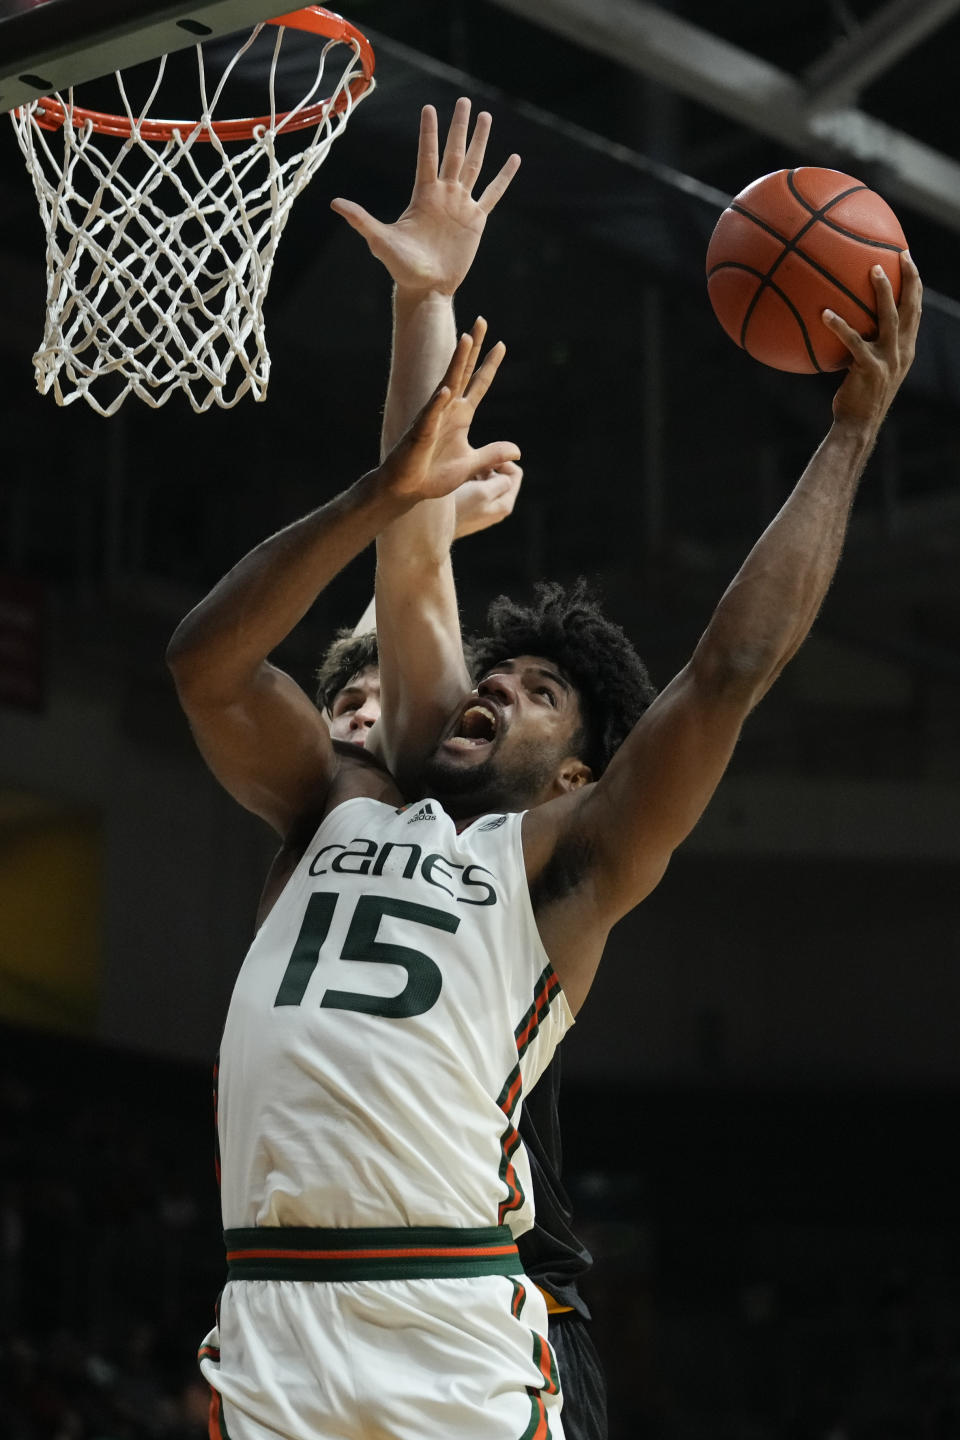 Miami forward Norchad Omier (15) jumps for the basket defended by La Salle forward Rokas Jocius (35) during the second half of an NCAA college basketball game, Saturday, Dec. 16, 2023, in Coral Gables, Fla. Miami defeated La Salle 84-77. (AP Photo/Rebecca Blackwell)